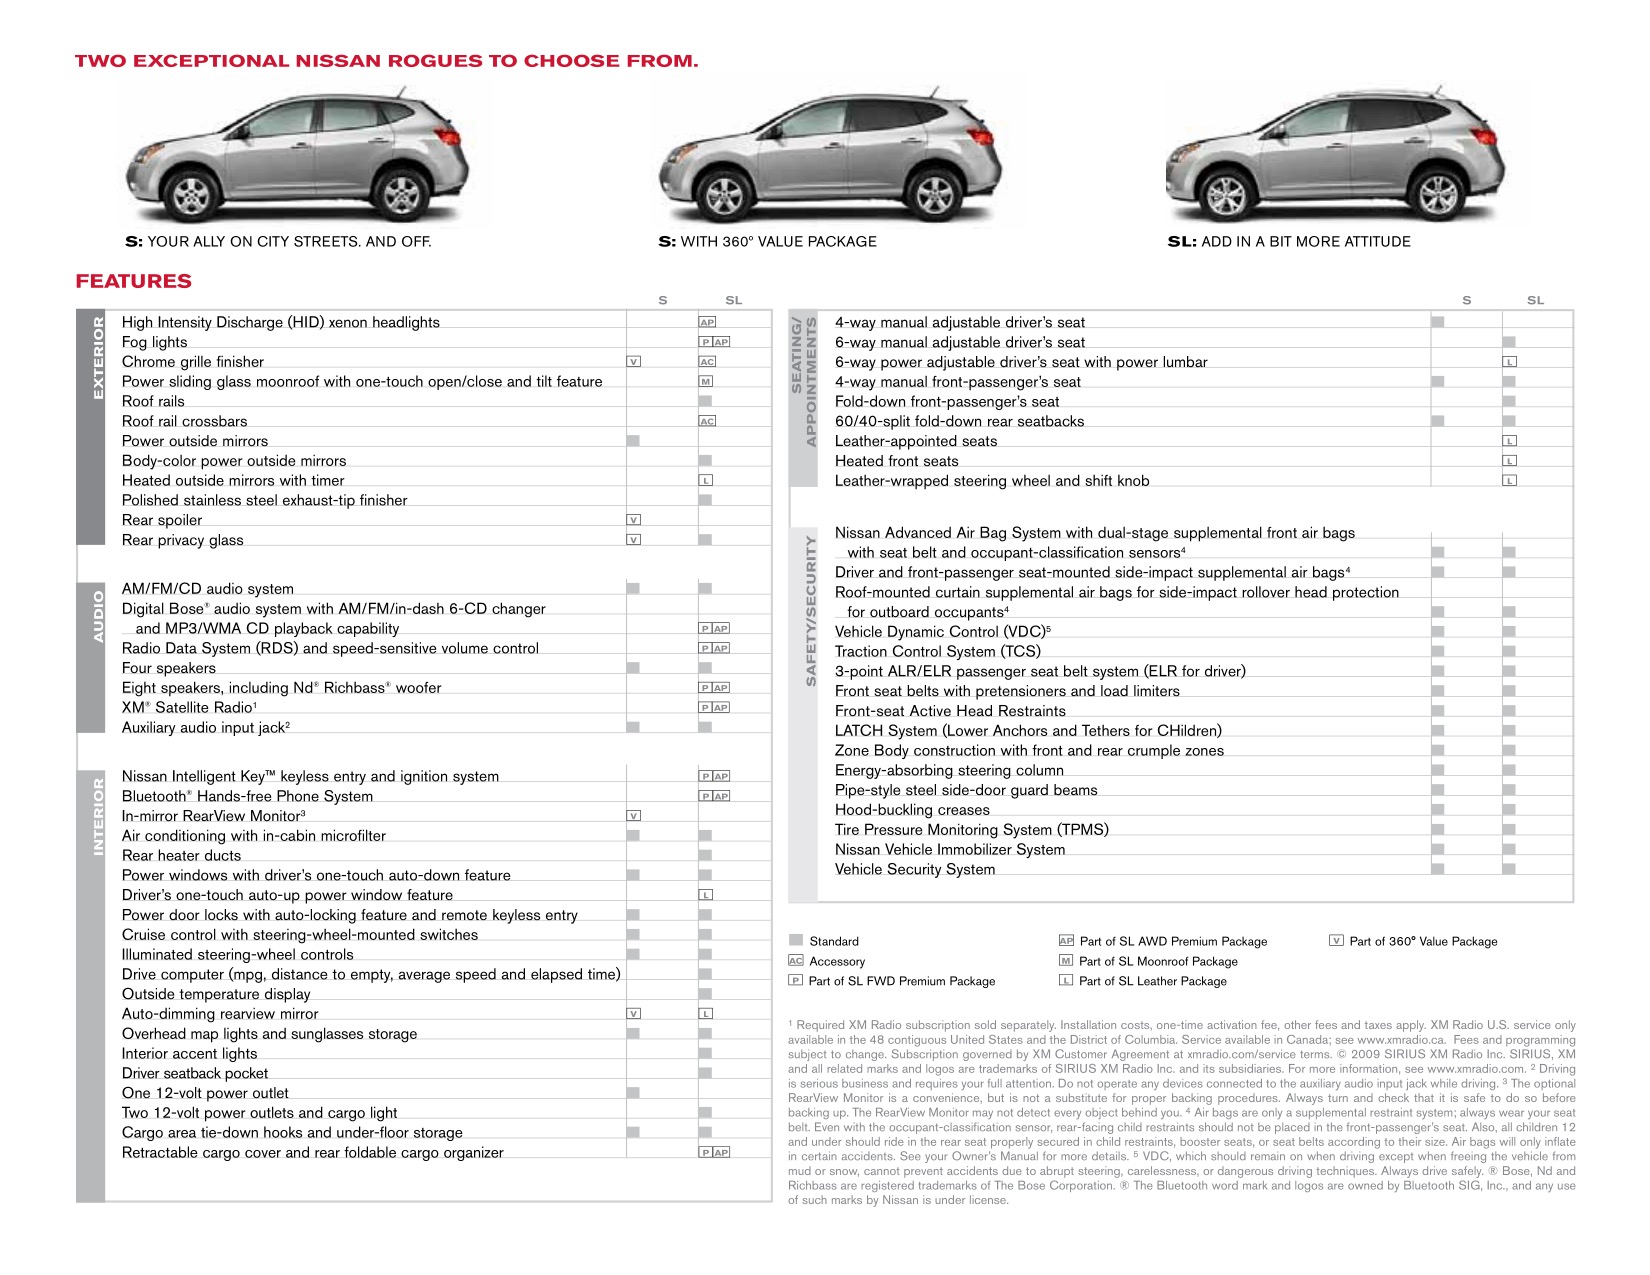 2010 Nissan Rogue Brochure Page 2